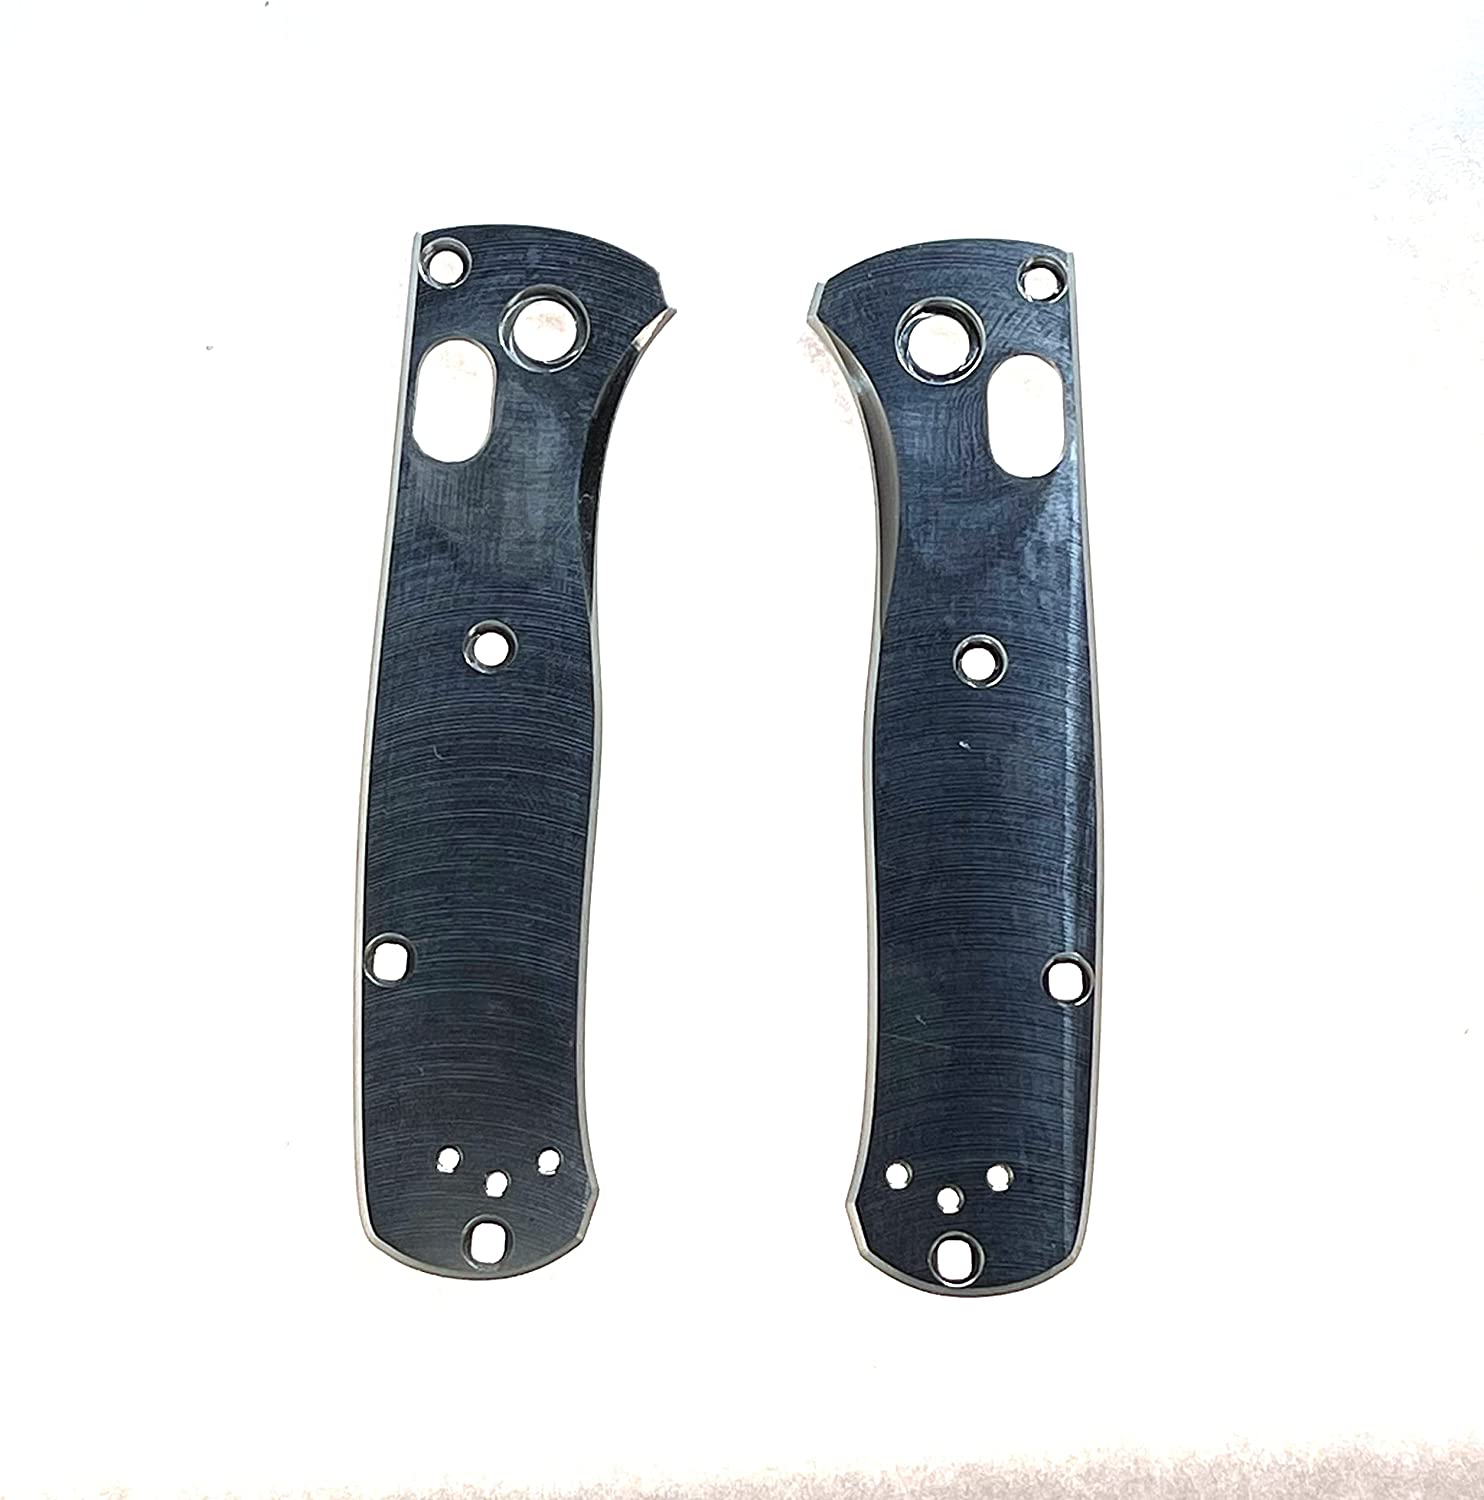 Billet Aluminum Compatible Replacement Scales for Benchmade Mini Bugout Smooth – Made in USA, Handle/Grip ONLY, Black